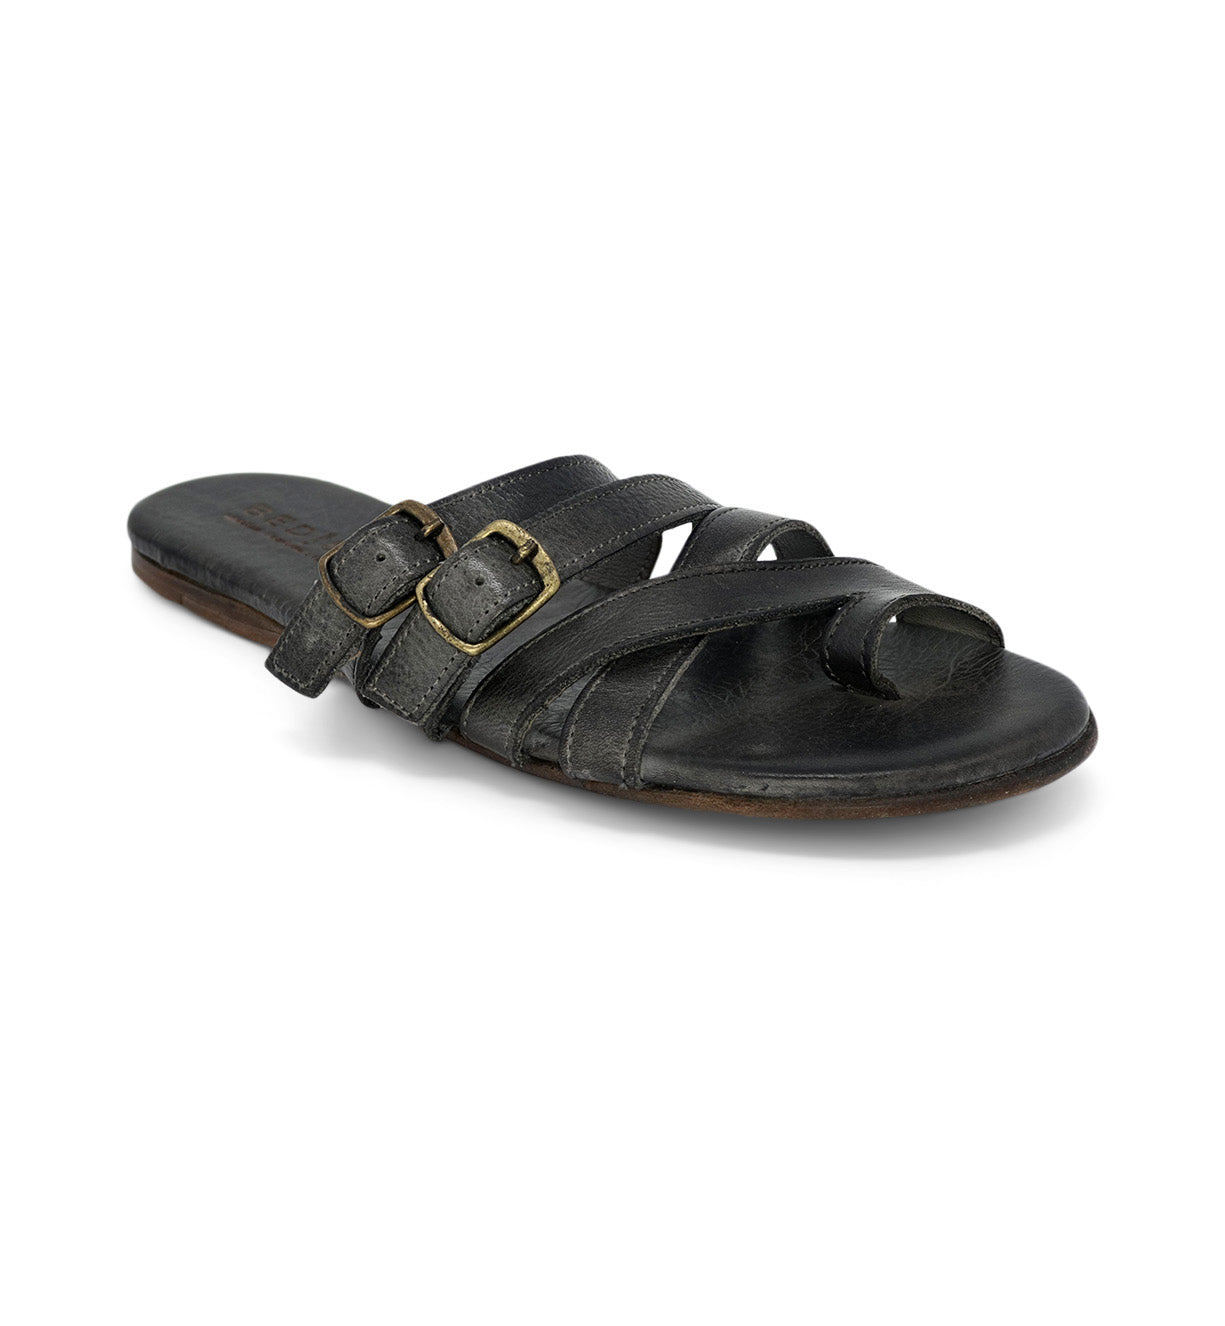 Hilda by Bed Stu black leather sandals with buckles.